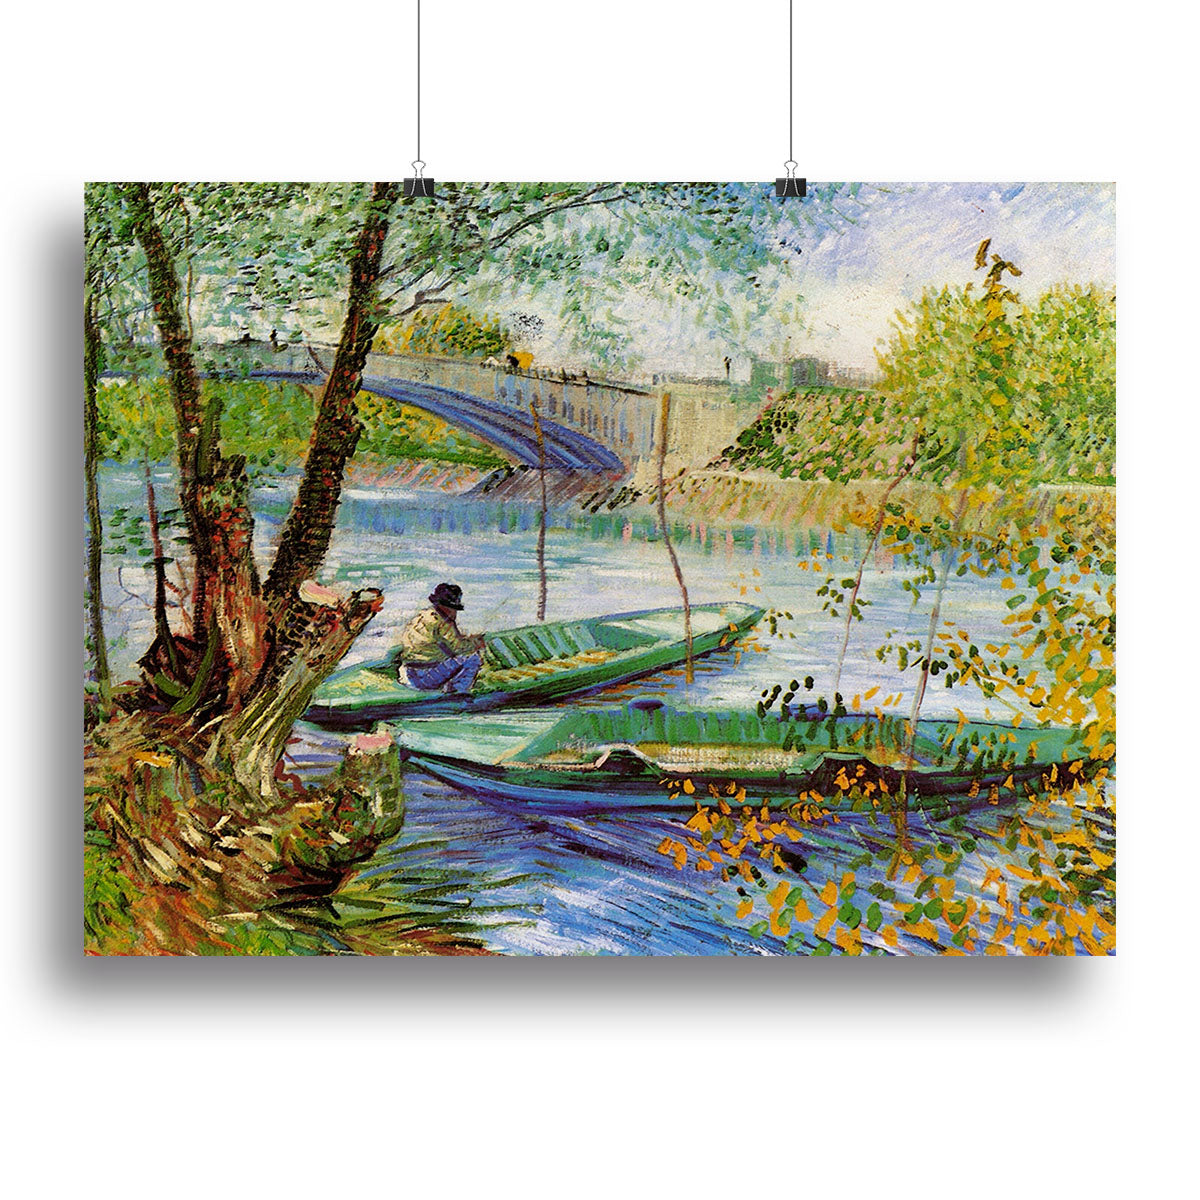 Fishing in Spring by Van Gogh Canvas Print or Poster - Canvas Art Rocks - 2